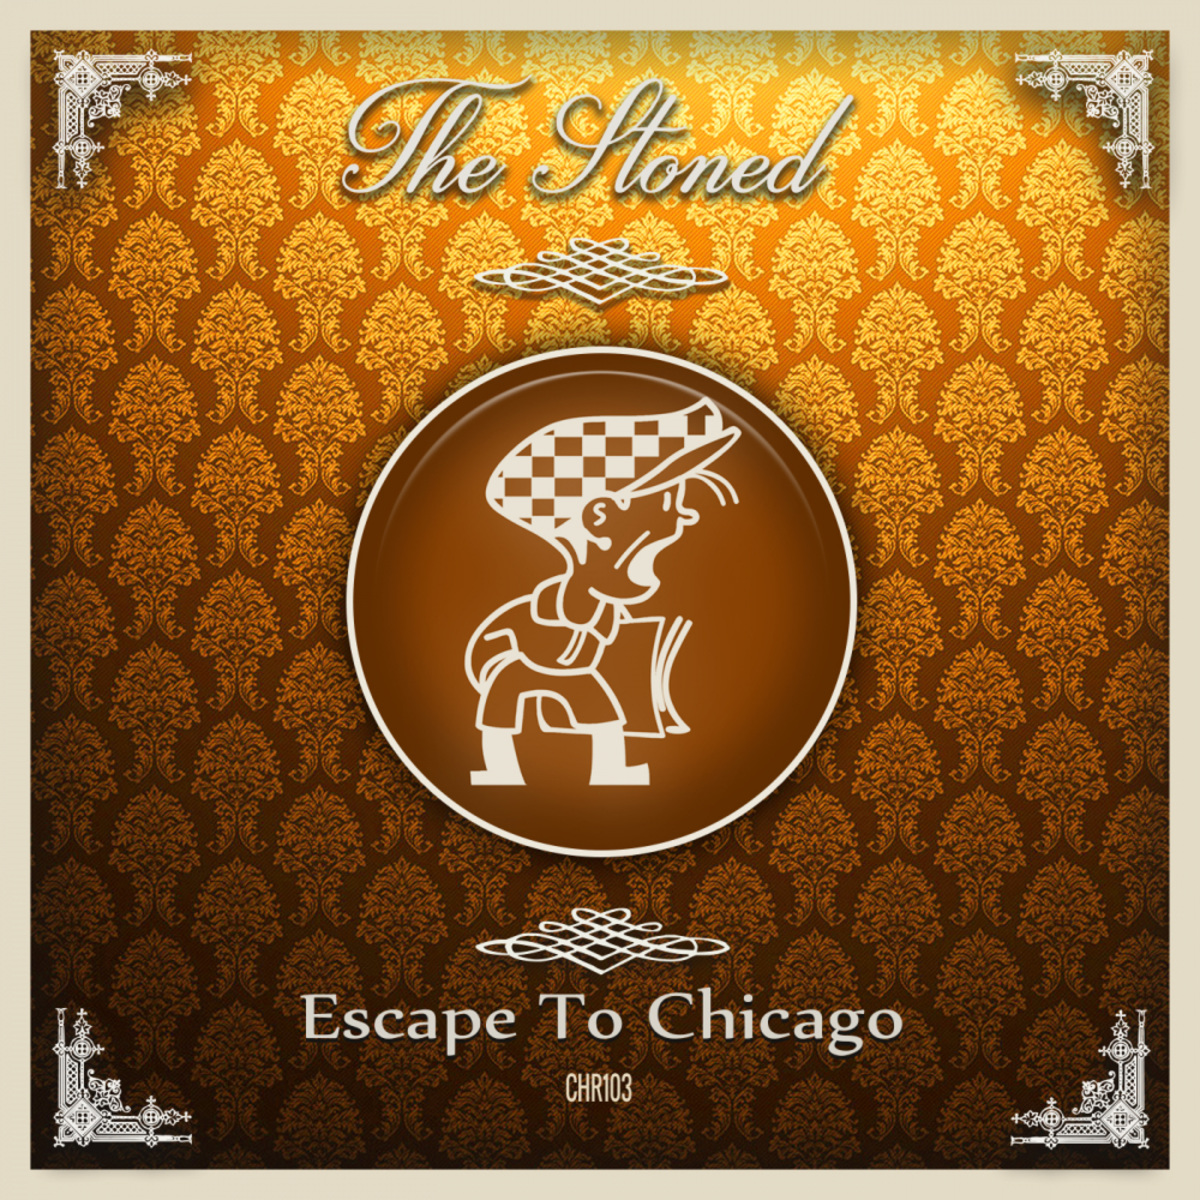 The Stoned - Escape To Chicago / Cabbie Hat Recordings